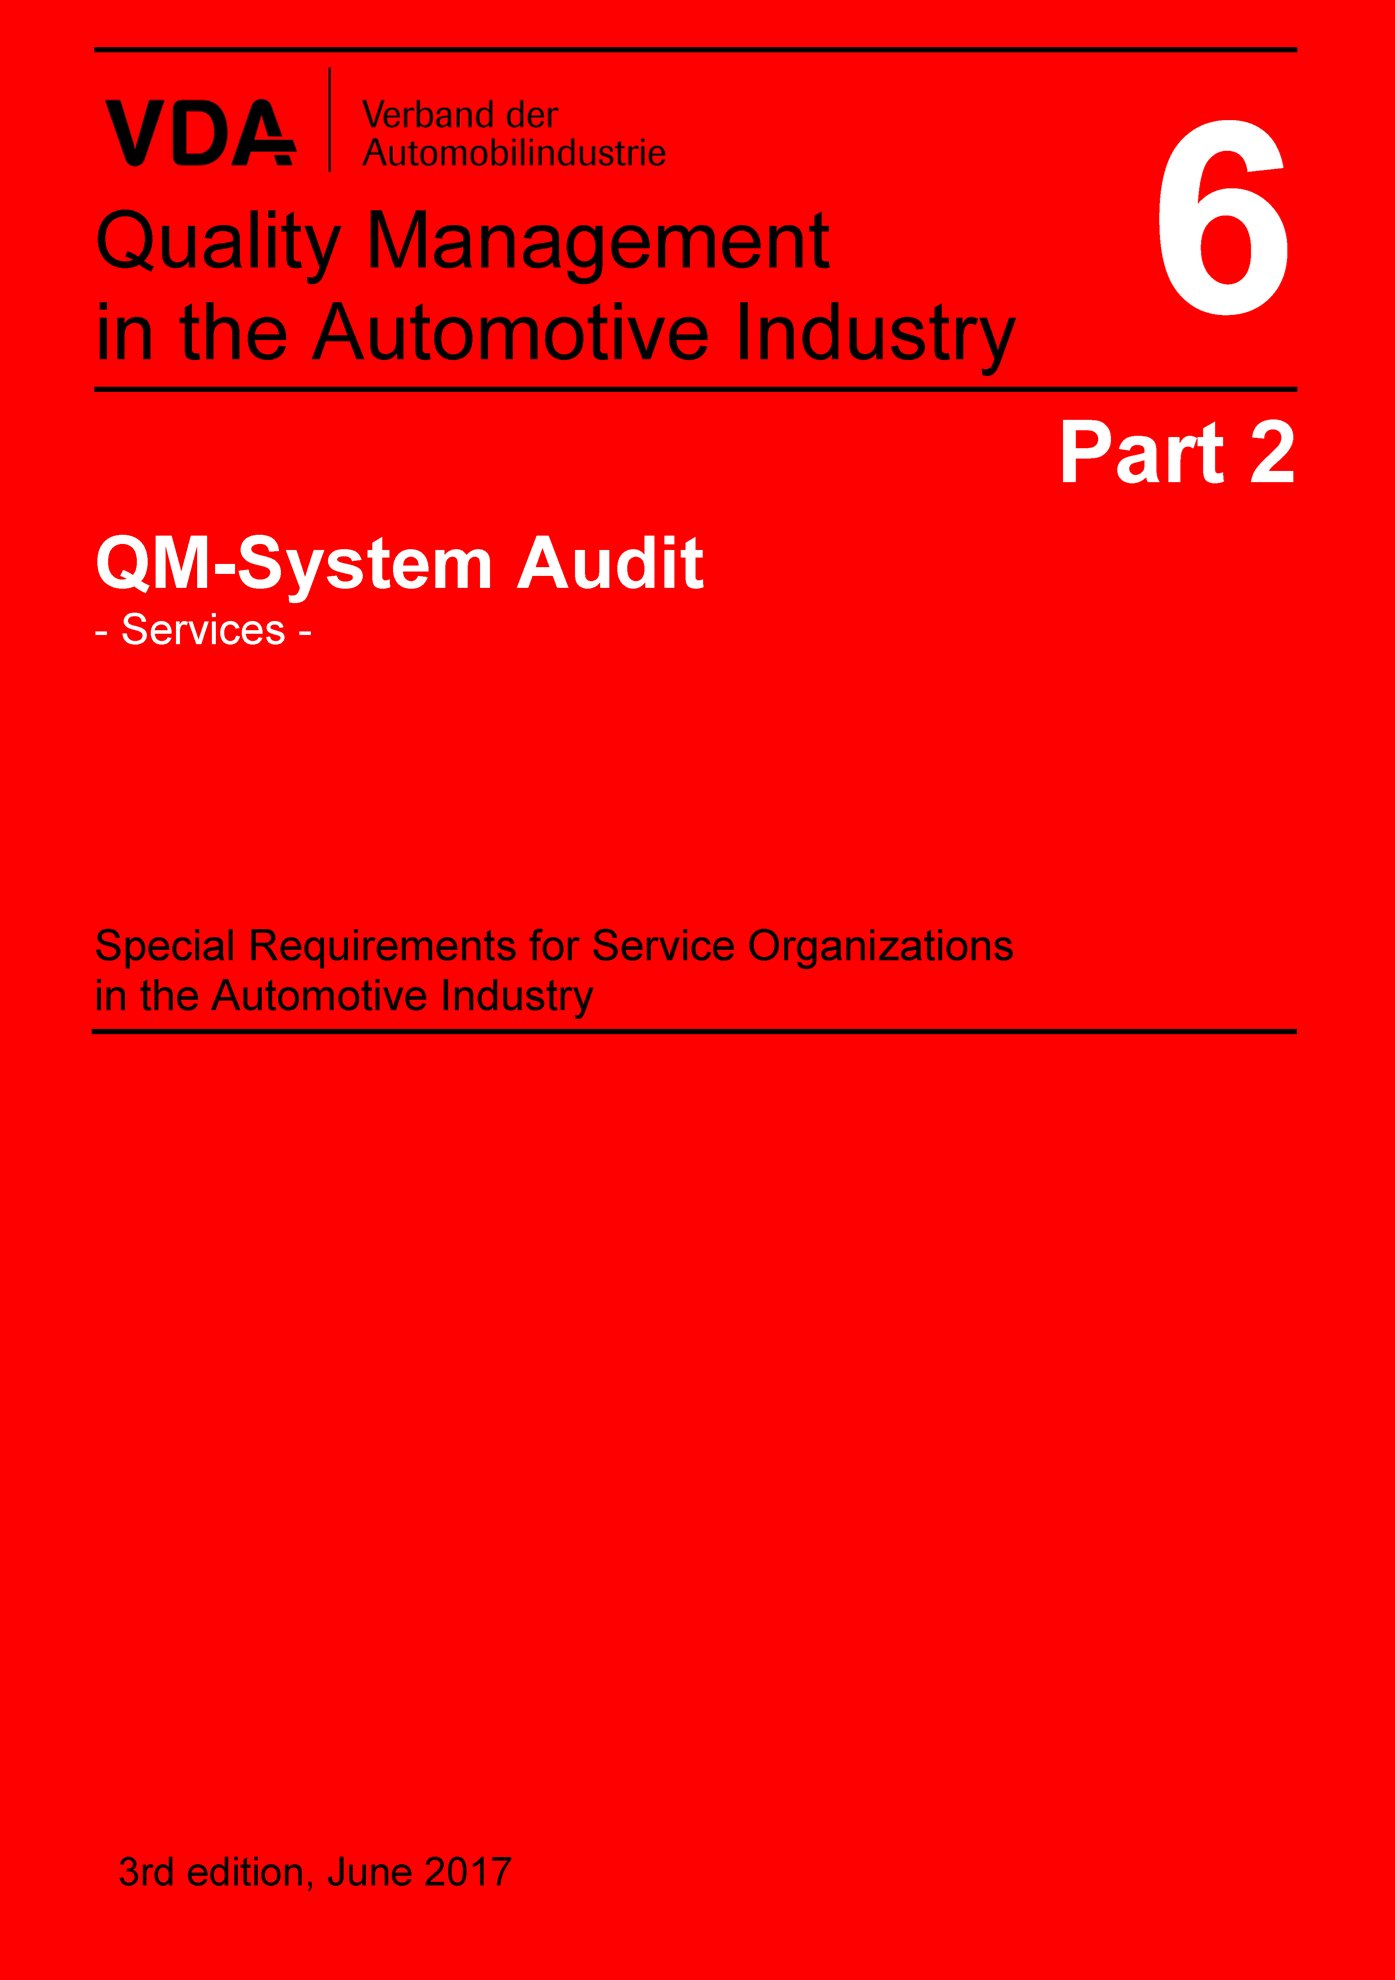 VDA Volume 6 Part 2_QM System Audit - Services - Special Requirements for Service Organizations in the Automotive Industry 3rd Edition, June 2017 1.1.2017